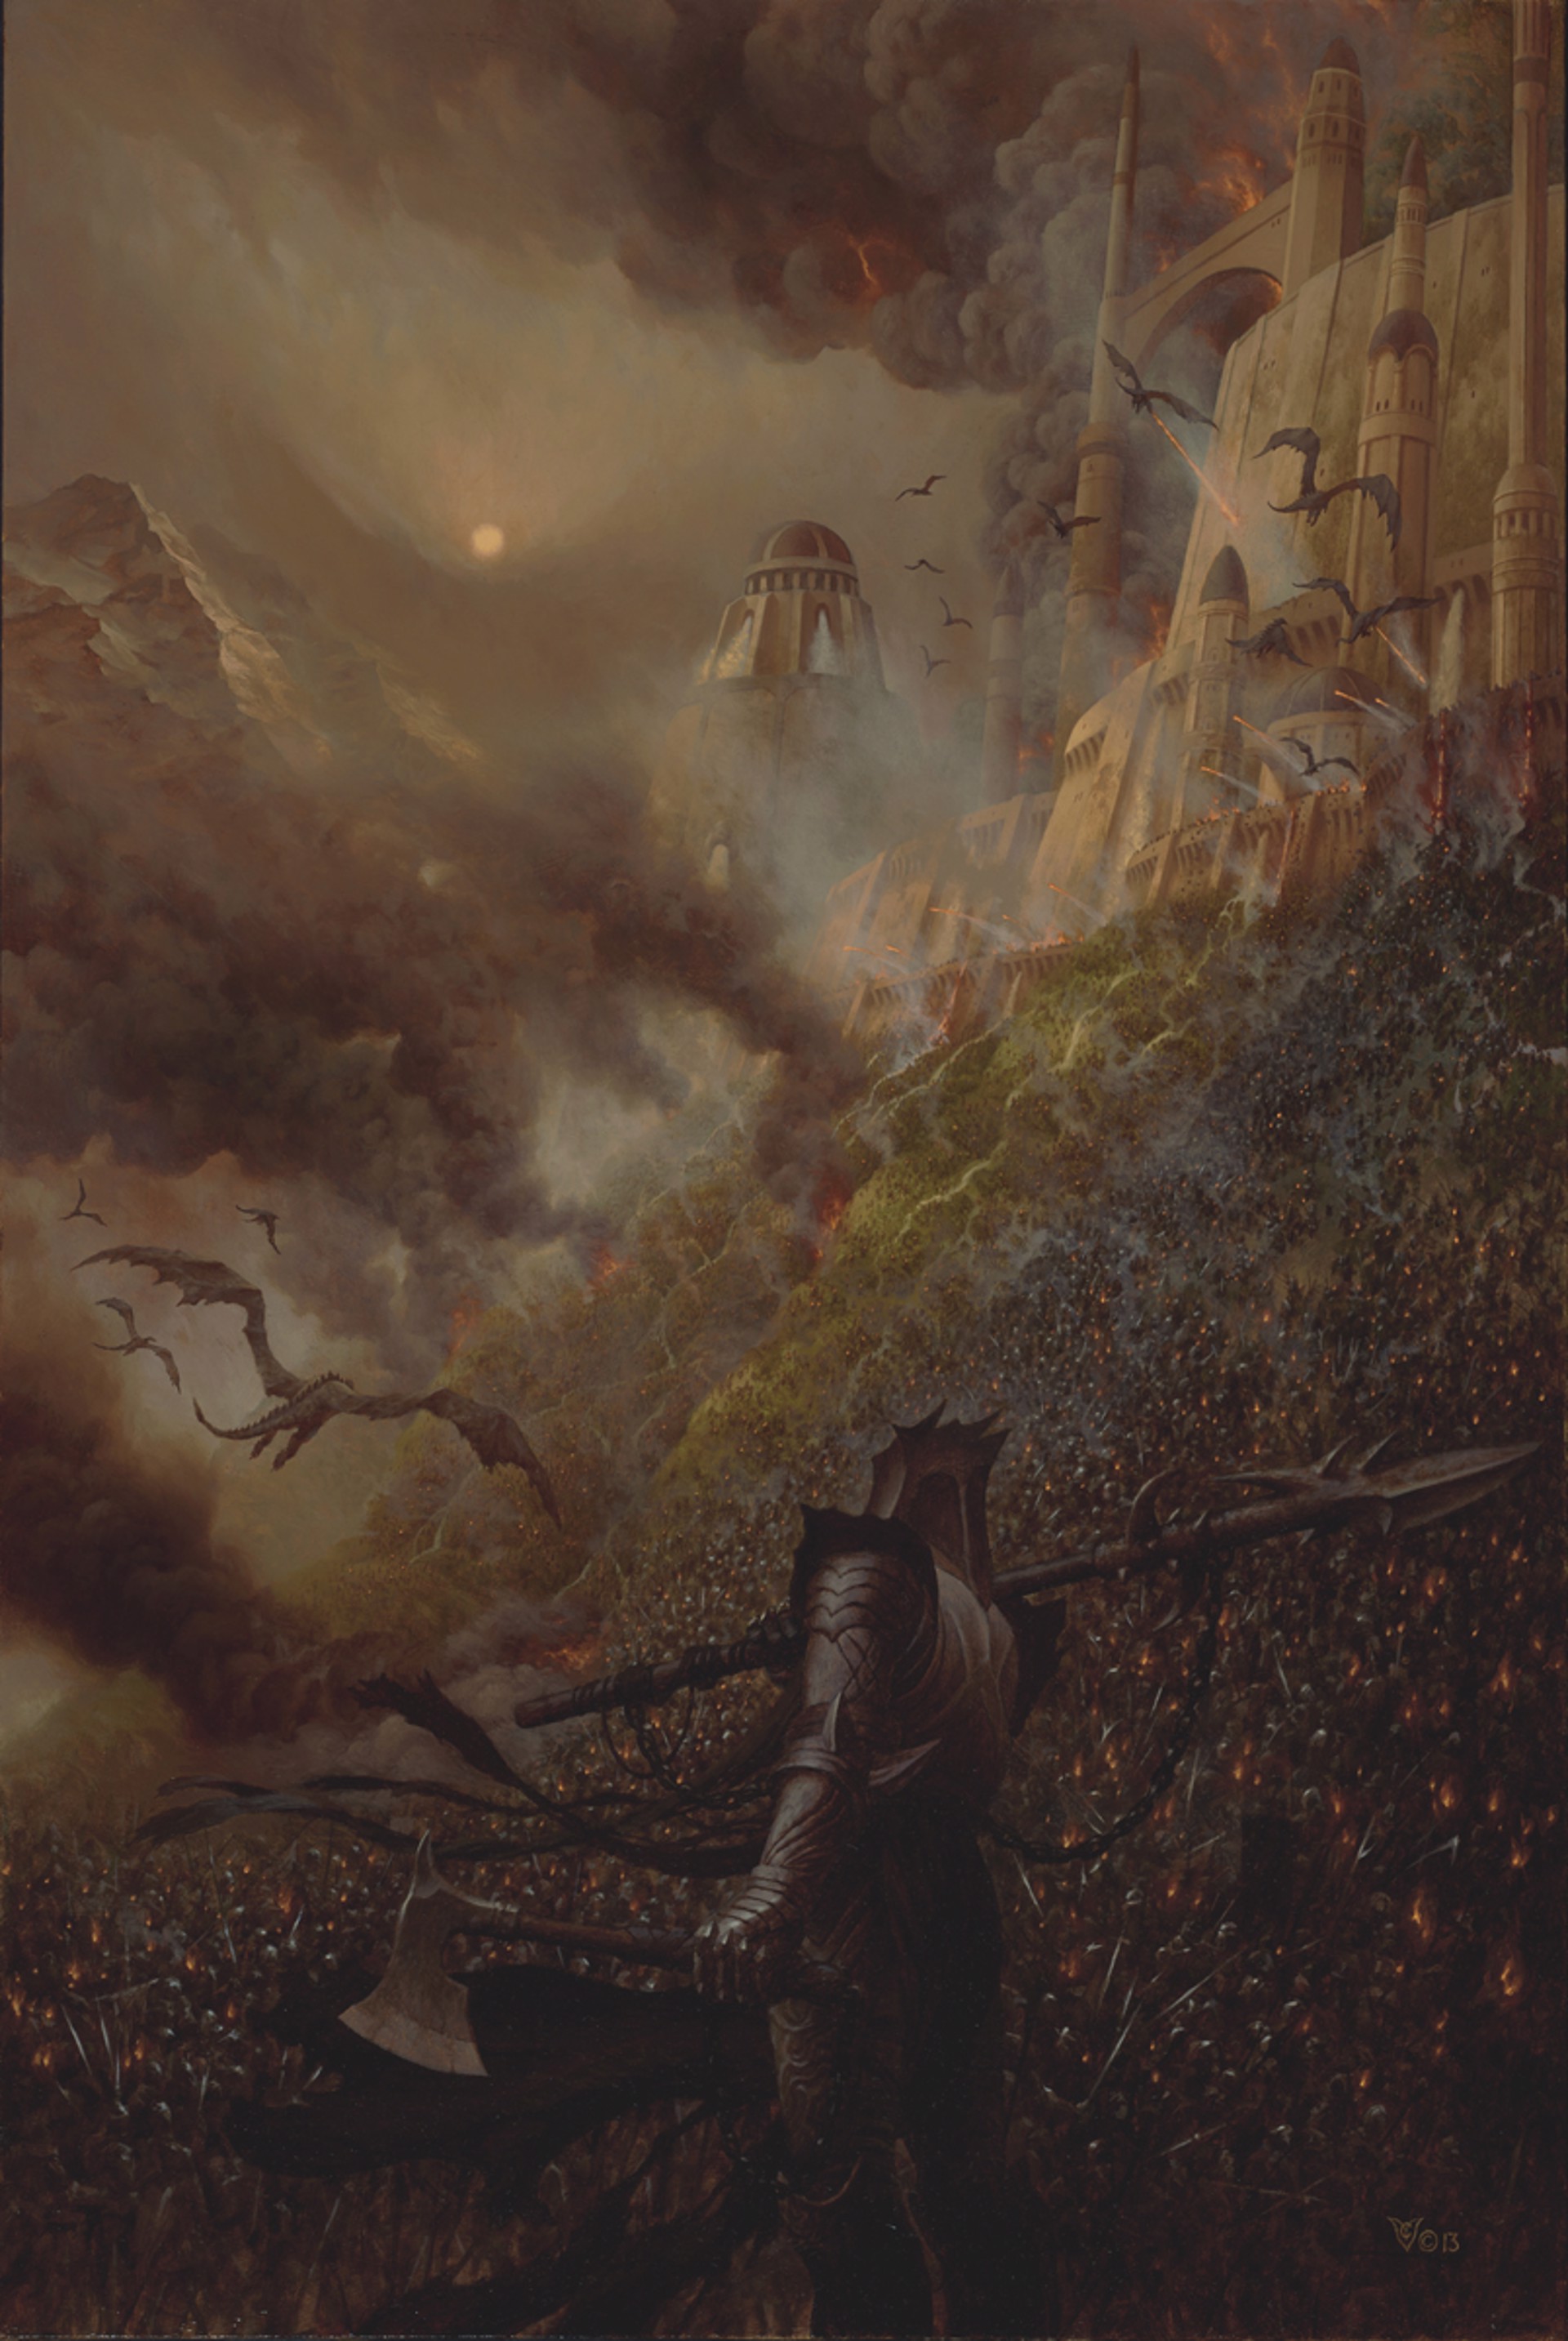 The Fall of Loth by Christophe Vacher